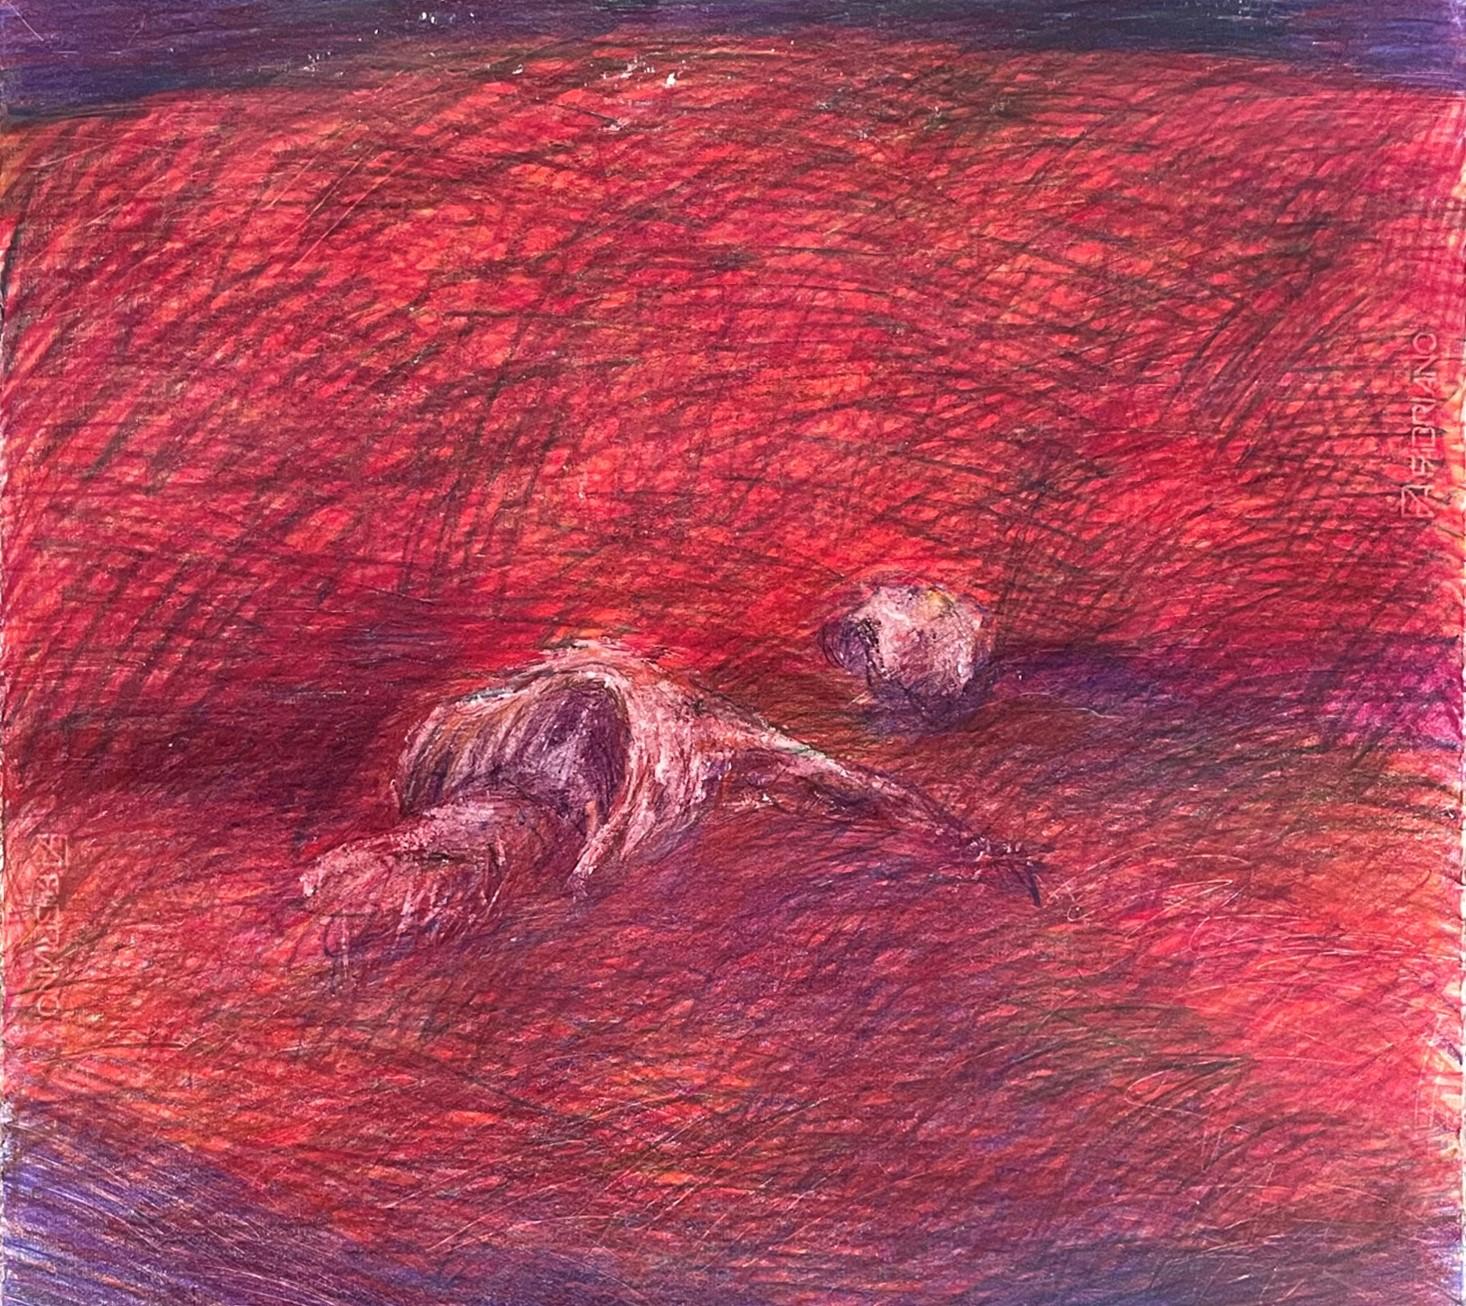 Untitled_Dead Body on the Field #1 - Red, Contemporary, 21st Century, Drawing - Neo-Expressionist Art by Zsolt Berszán